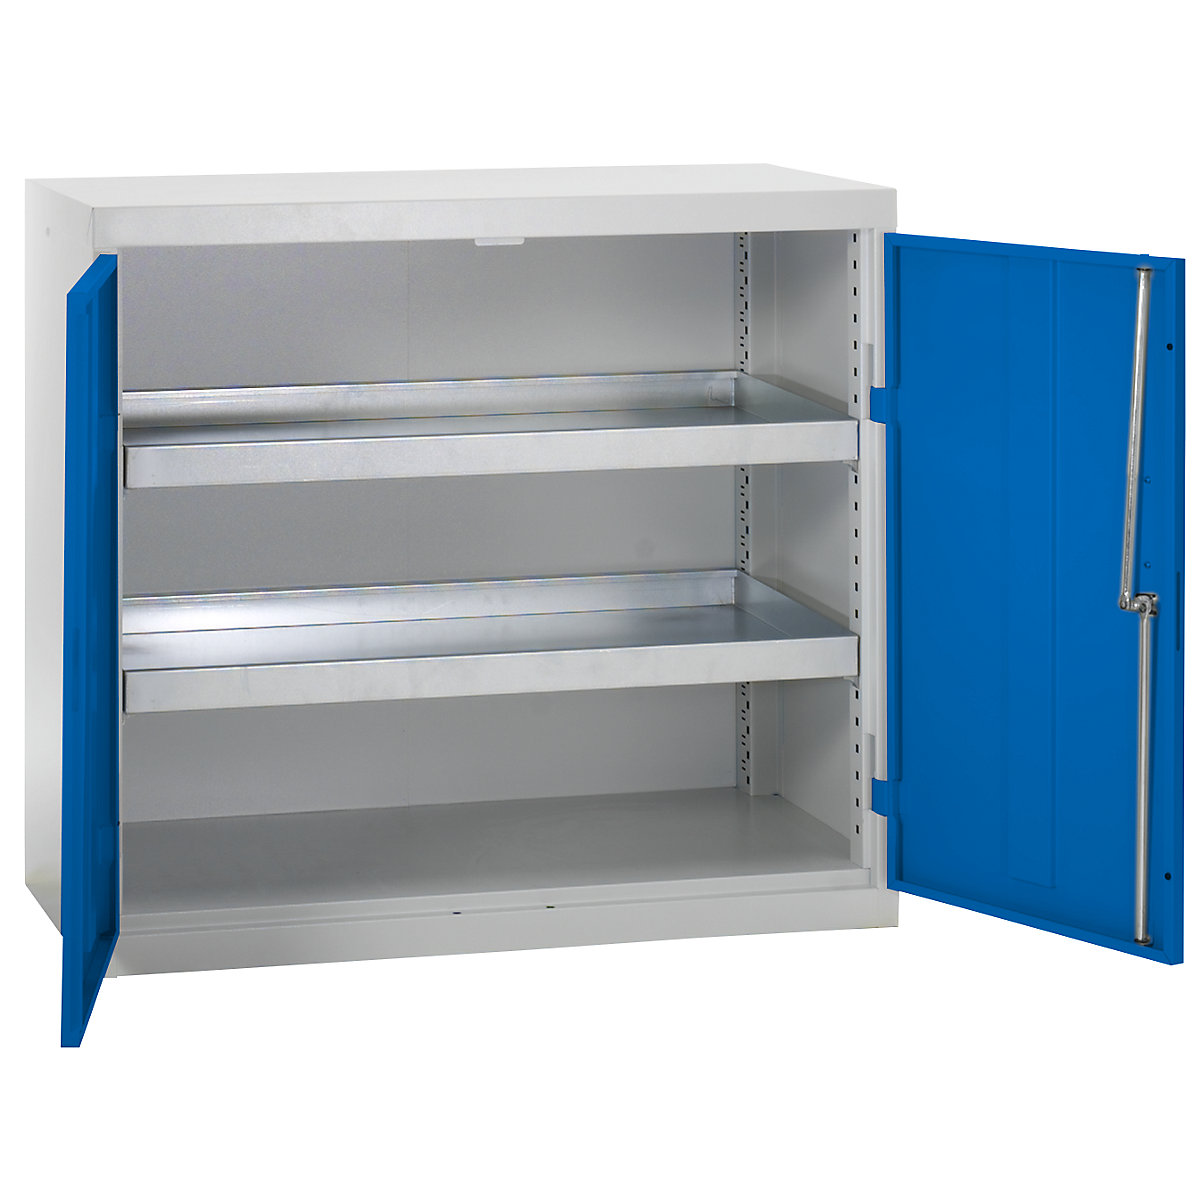 Environmental cupboard without door perforations, HxWxD 900 x 1000 x 500 mm, 2 tray shelves, light grey / gentian blue-4